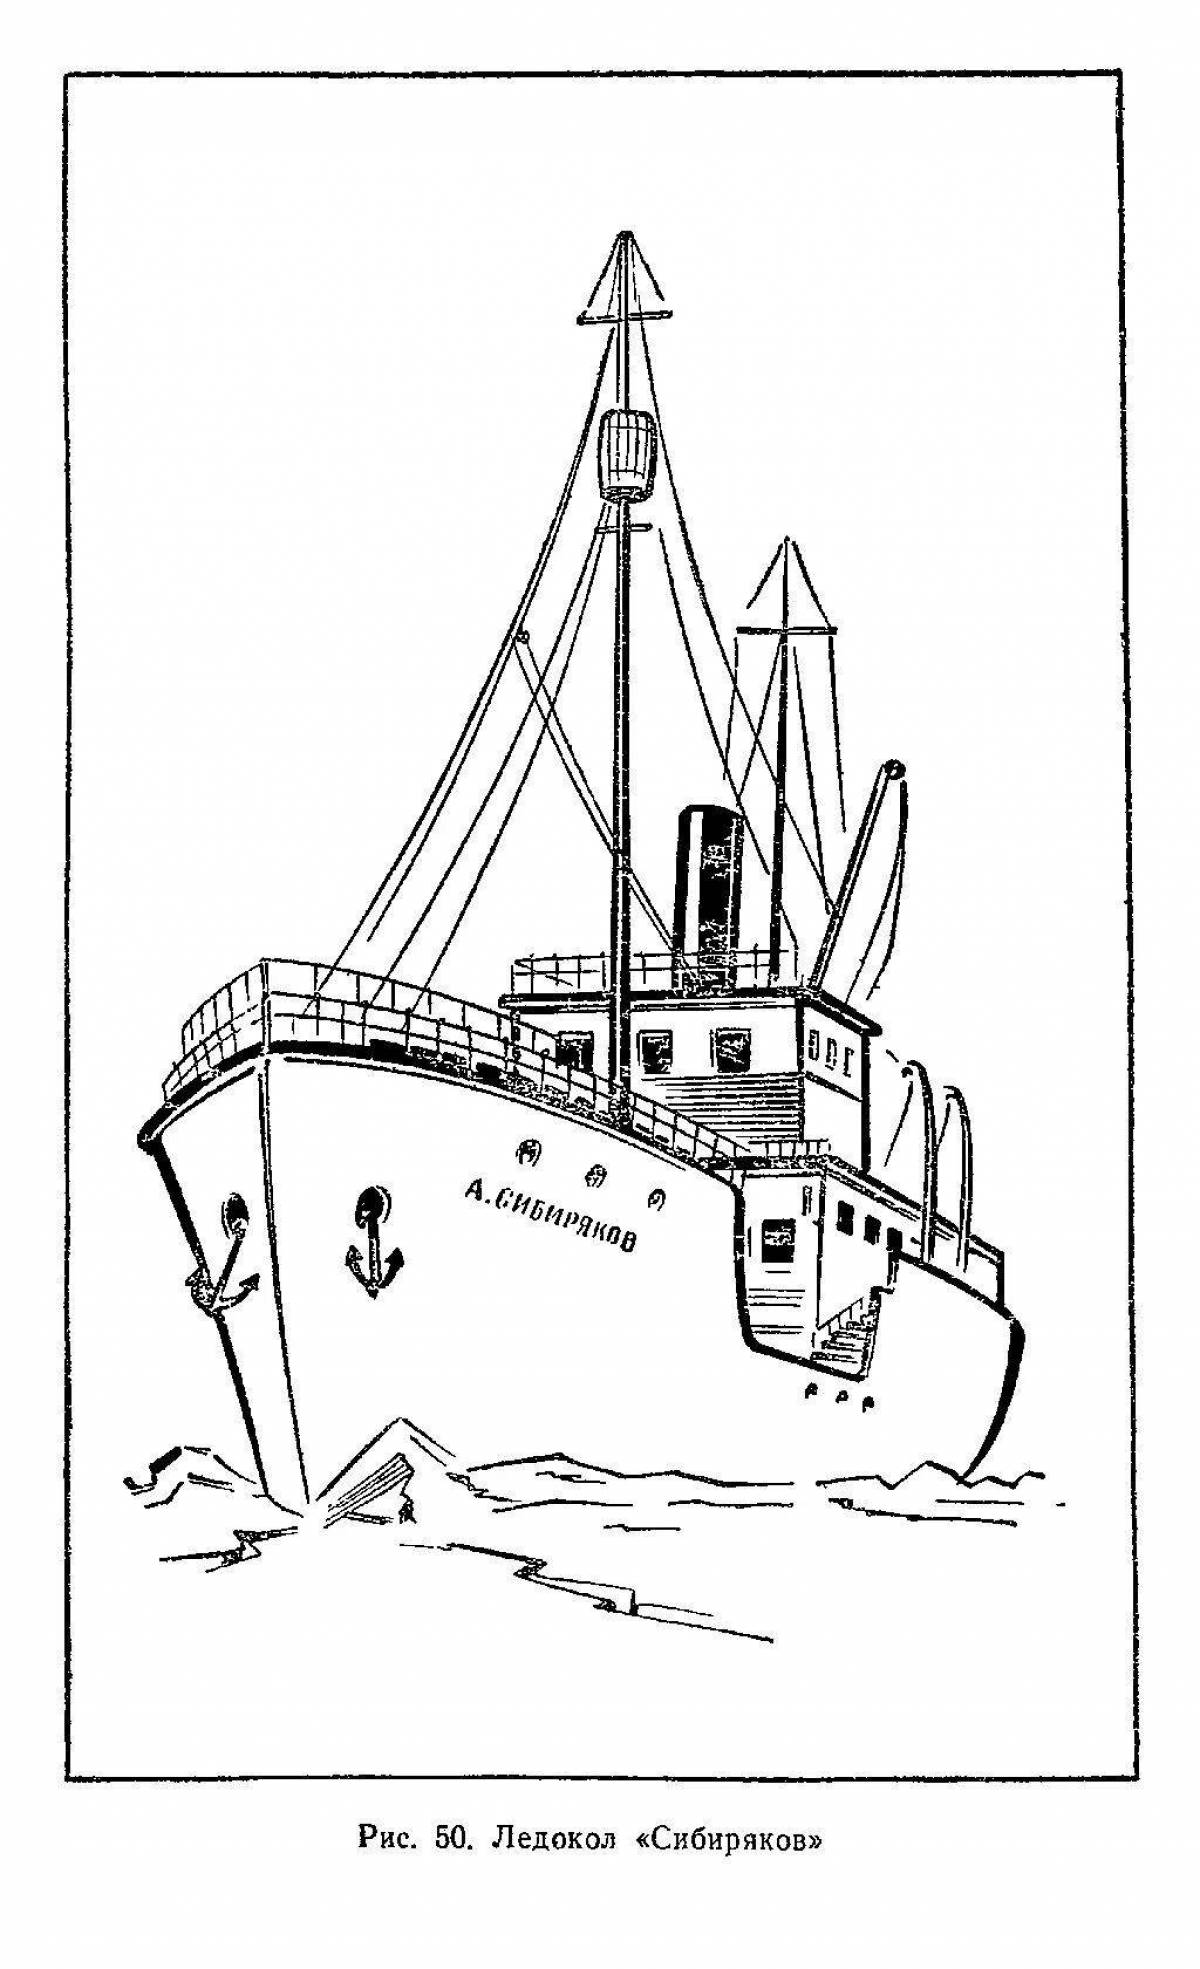 Coloring page happy nuclear icebreaker